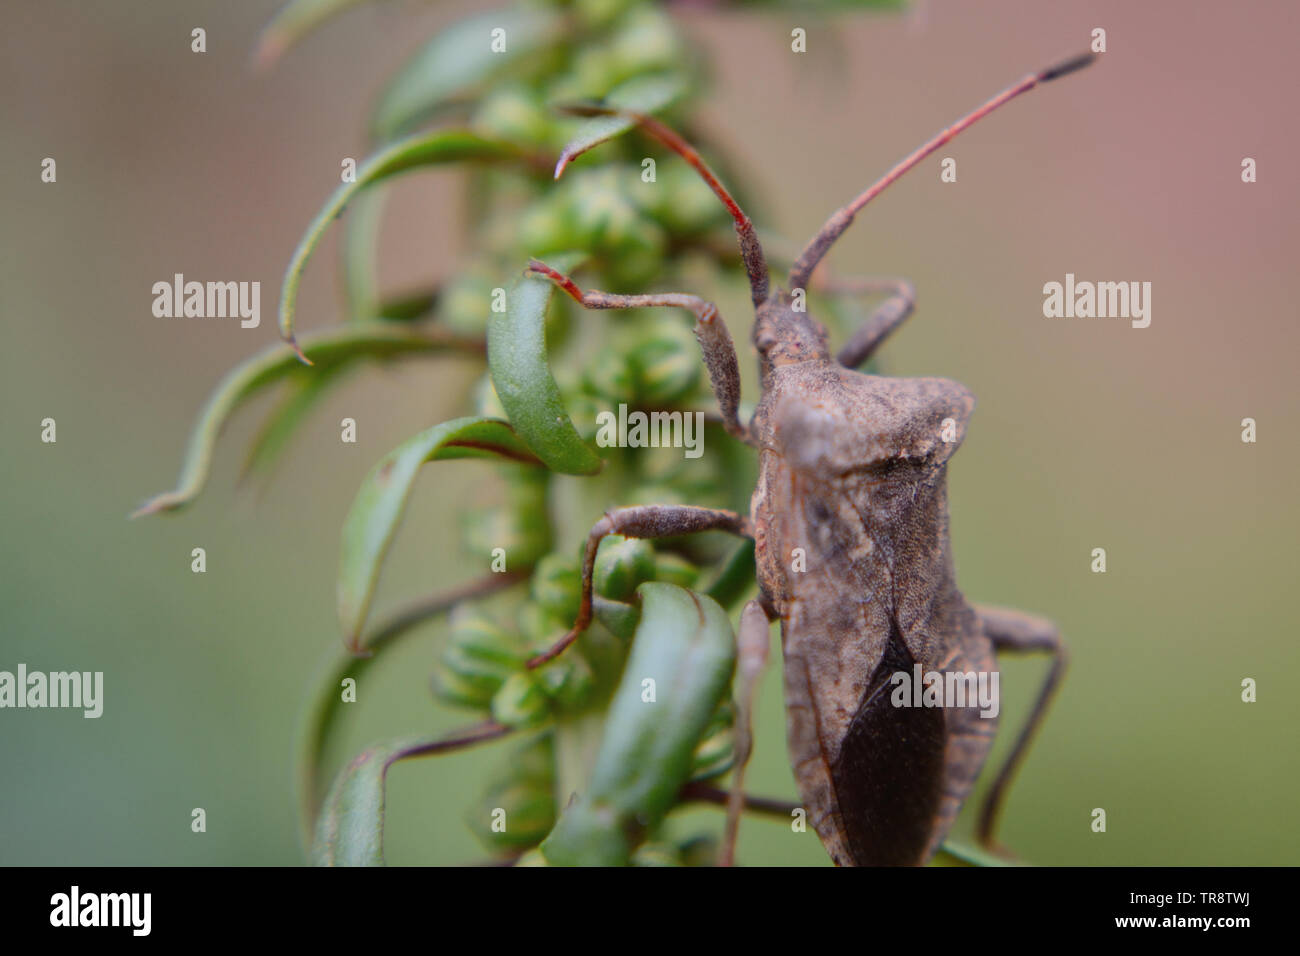 Leaf-footed bug,  Piezogaster calcarator Stock Photo